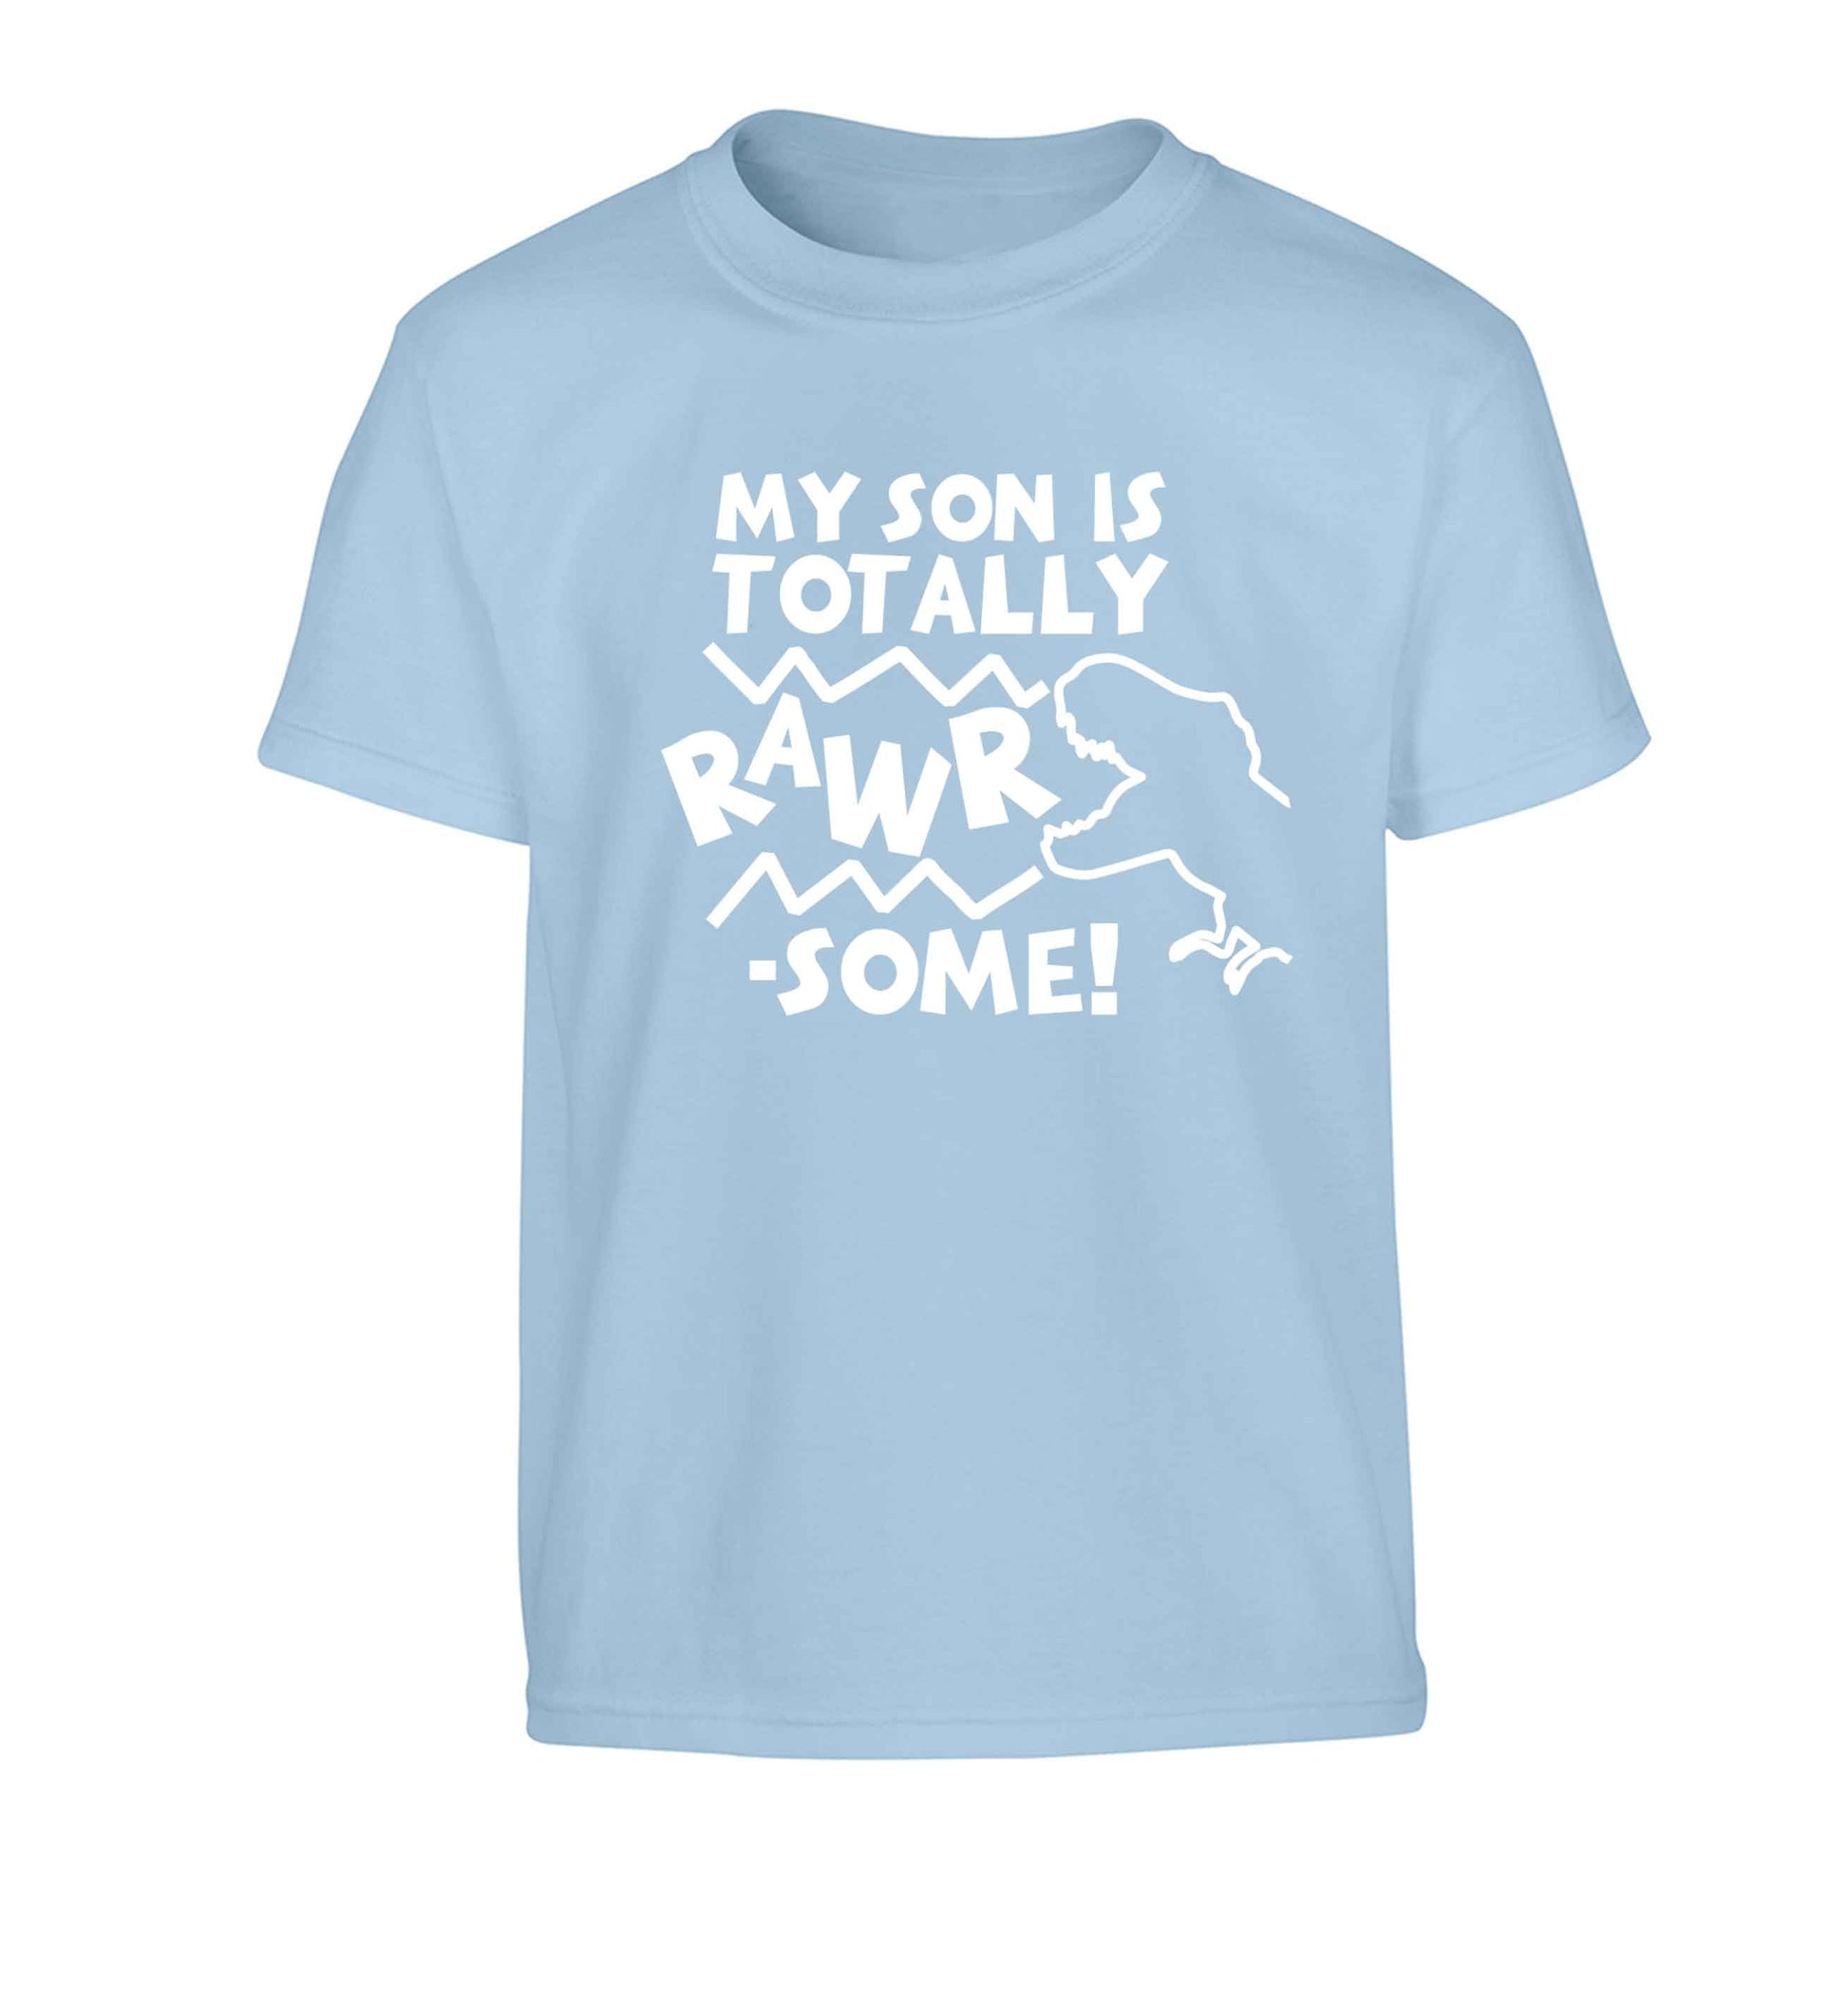 My son is totally rawrsome Children's light blue Tshirt 12-13 Years